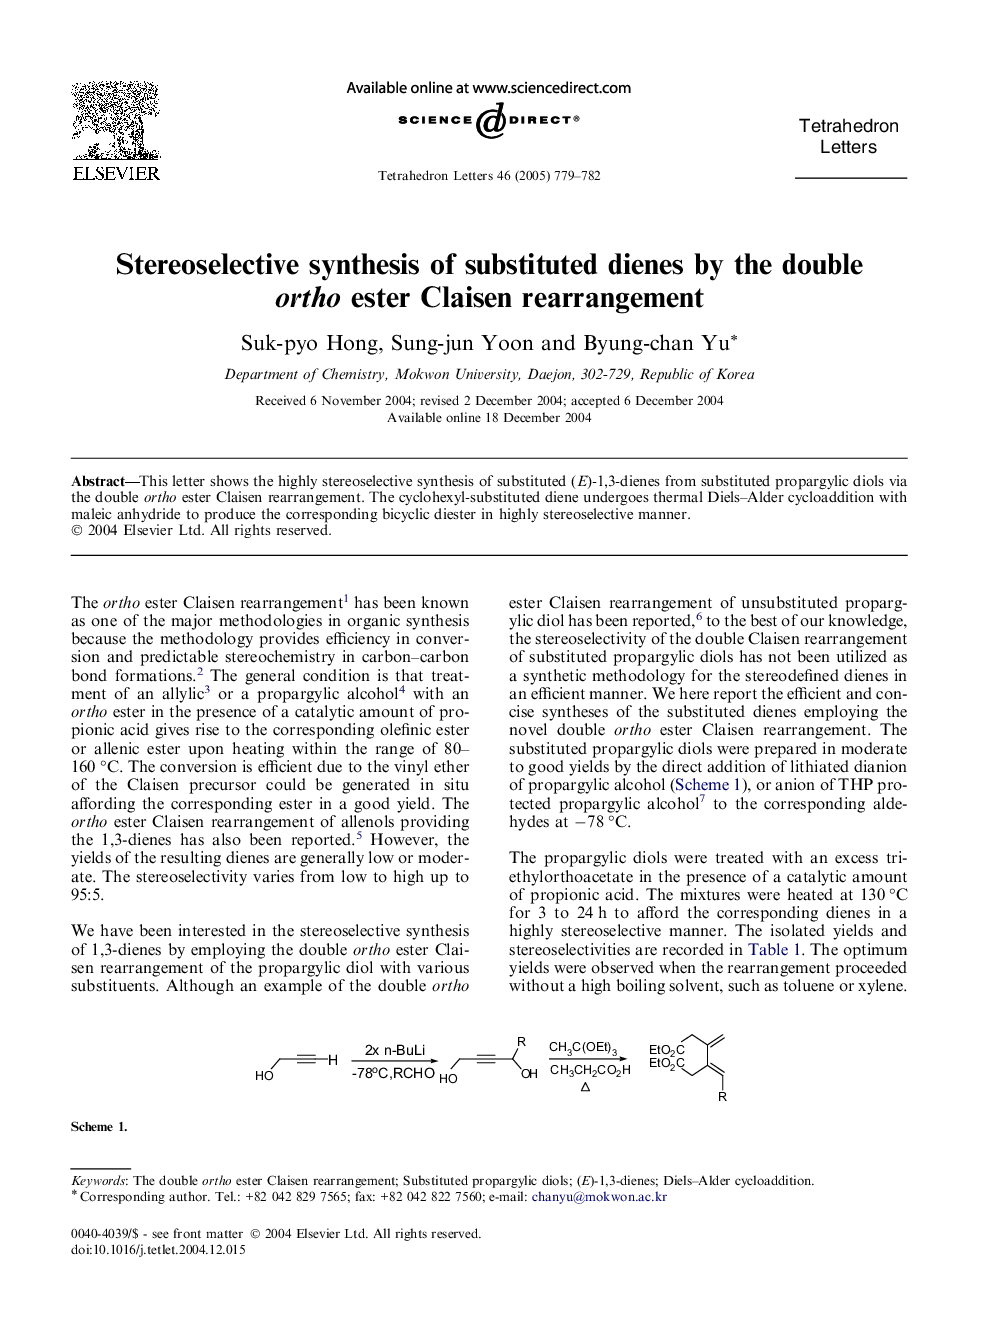 Stereoselective synthesis of substituted dienes by the double ortho ester Claisen rearrangement